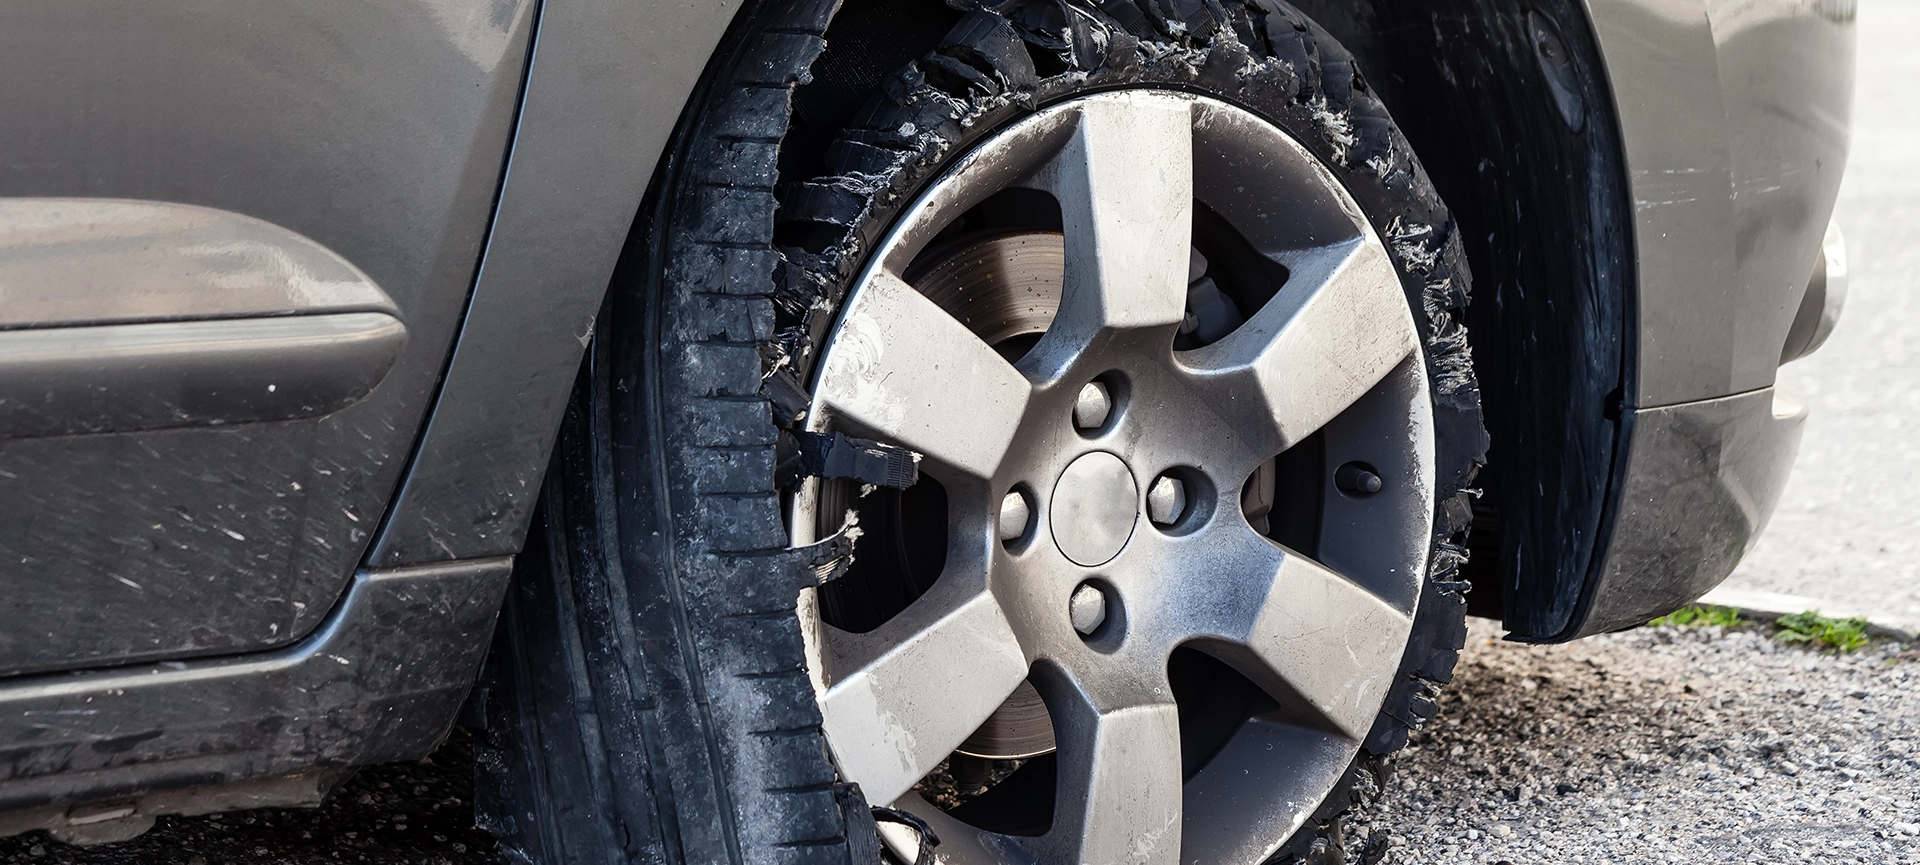 Rim Repair Toronto: How Much Does It Cost to Fix a Cracked Car Rim?